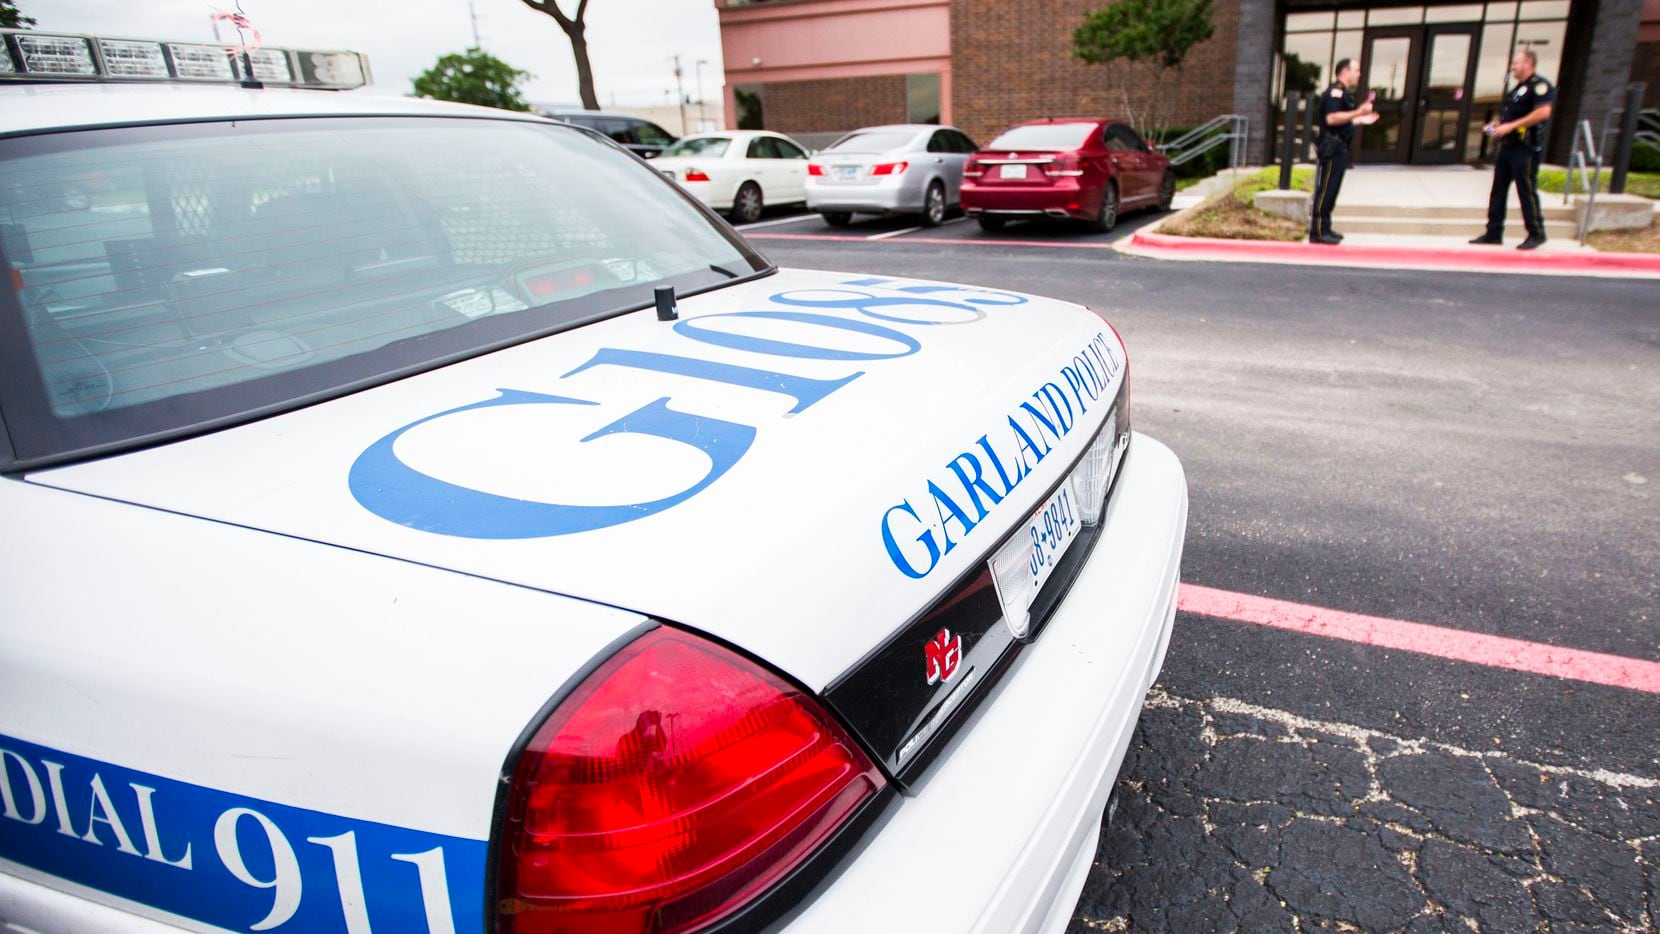 Don't drink and drive, and you won't wind up in the backseat of a Garland police cruiser.